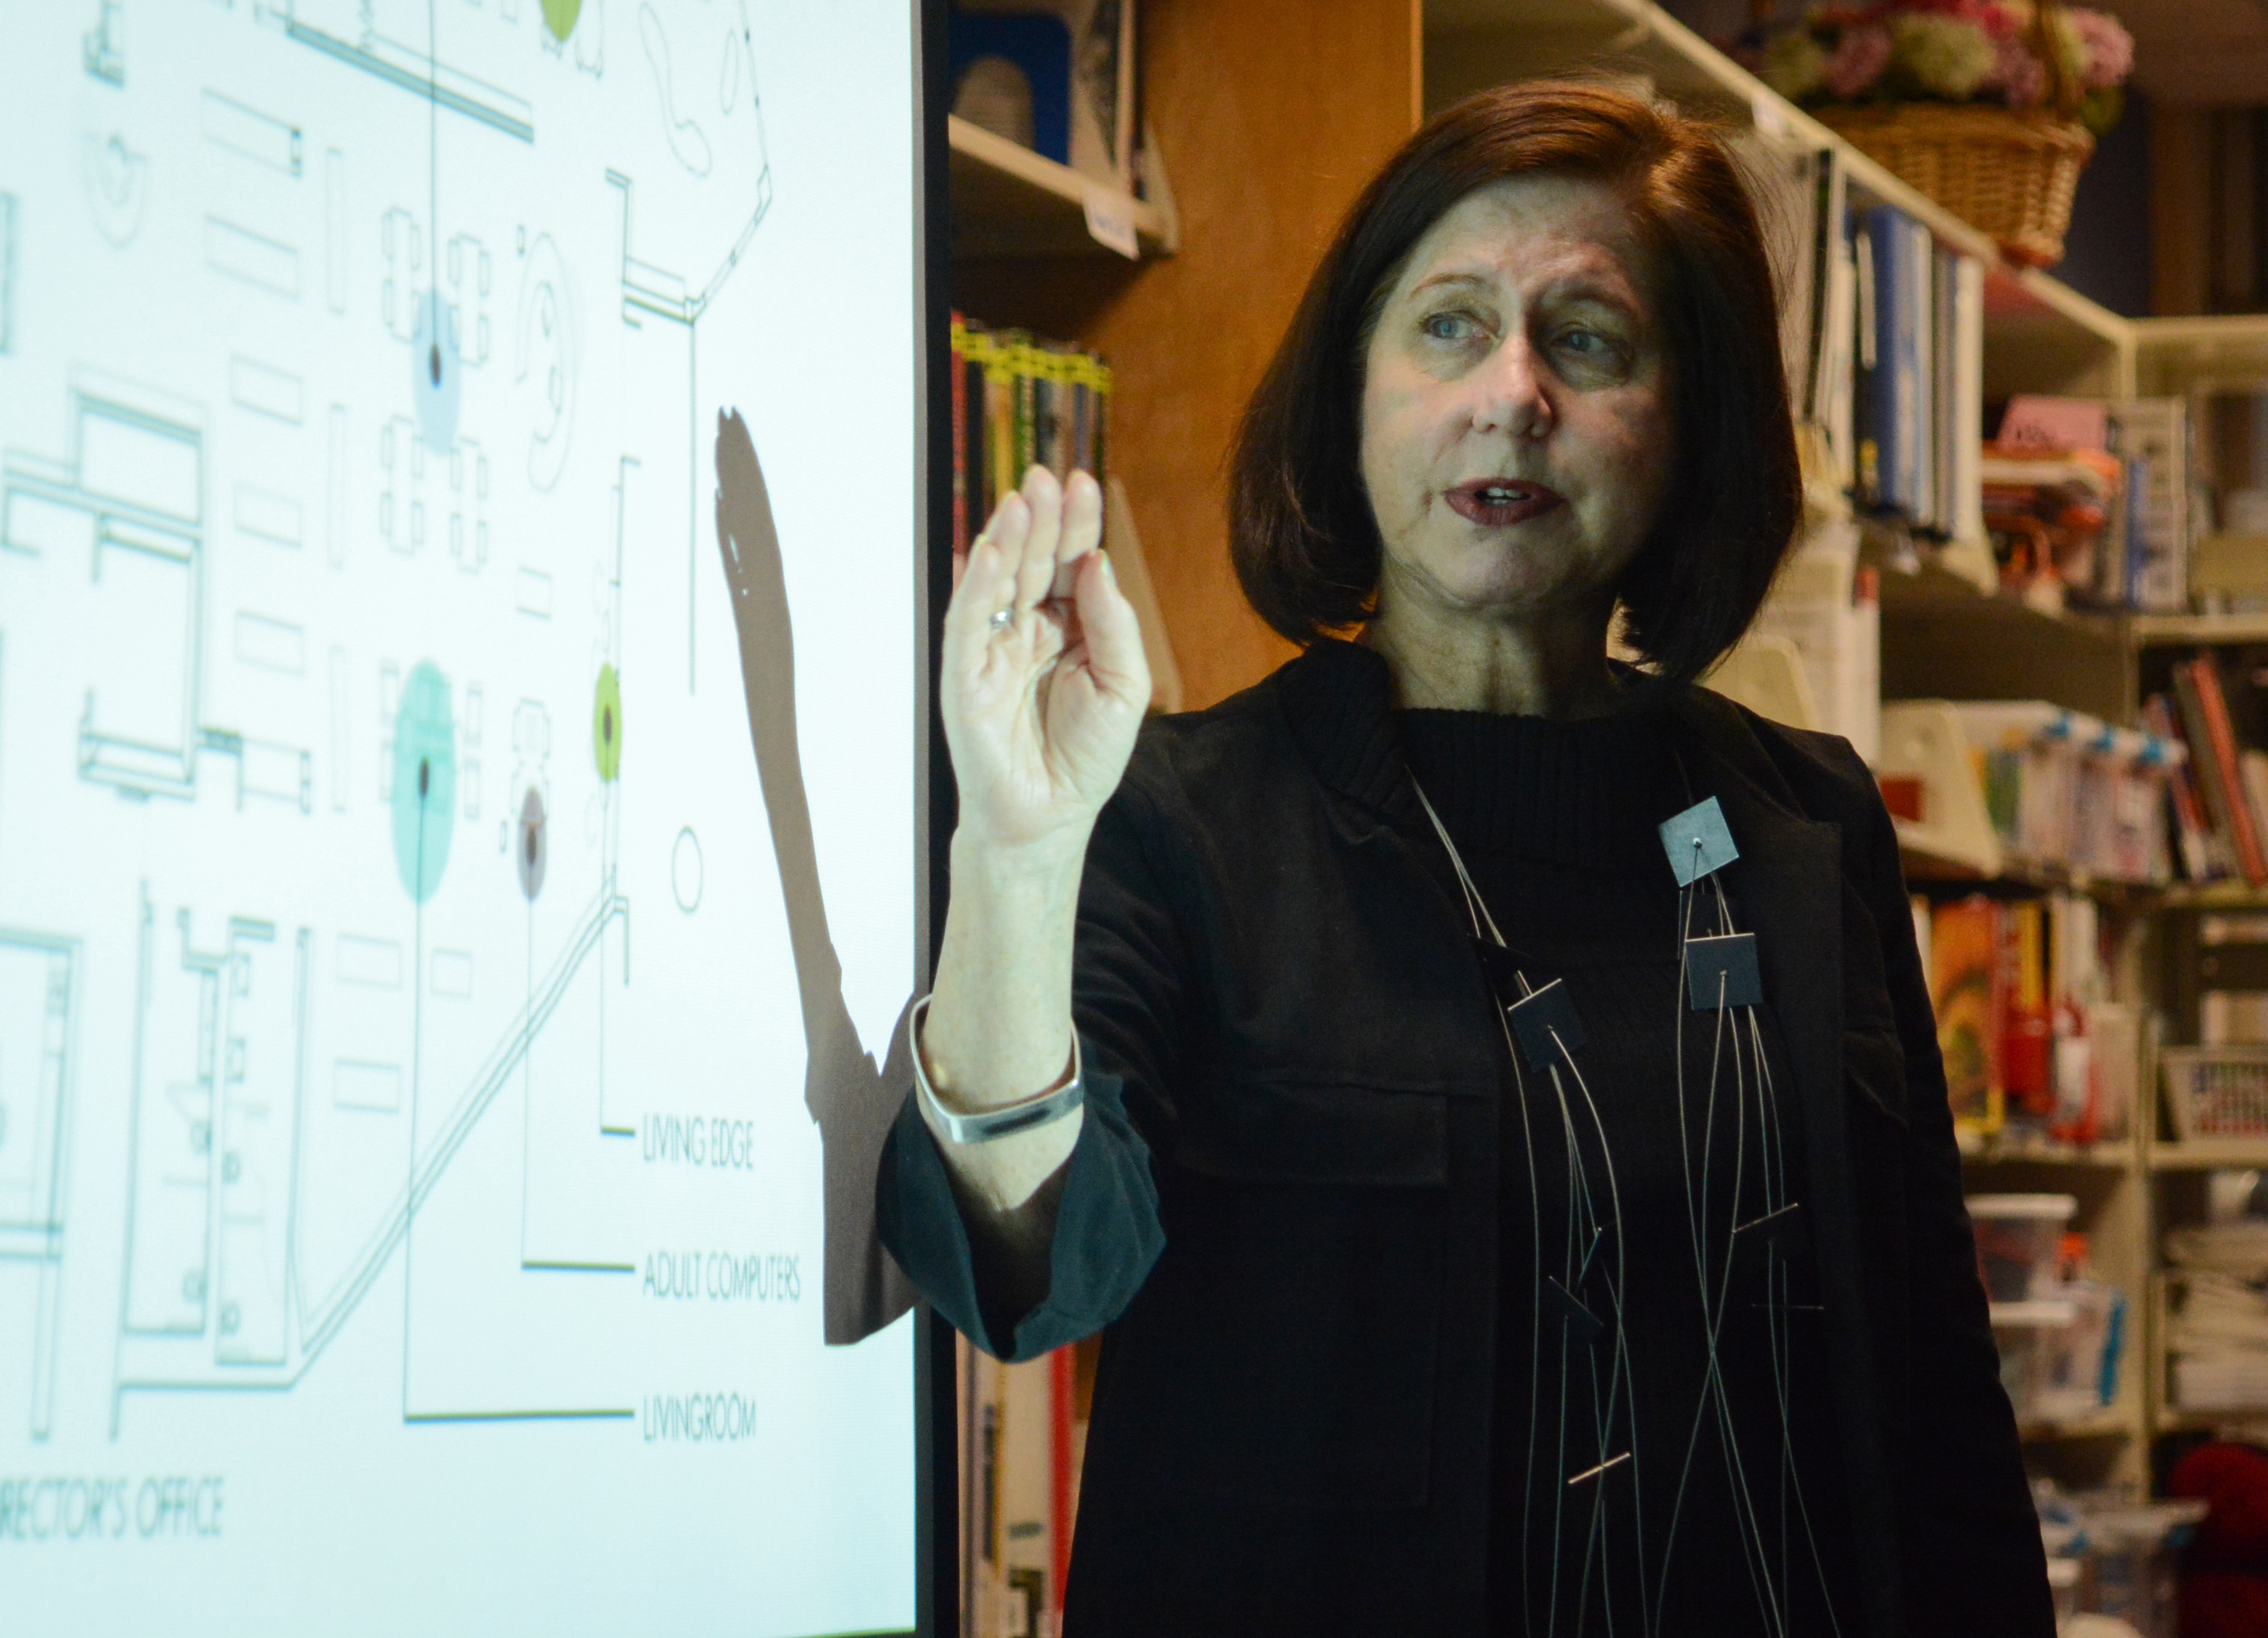 Elisabeth Martin, a principal at the architectural firm MDA designgroup, explains parts of a draft plan for Station Branch. (Photo by Janelle Clausen)